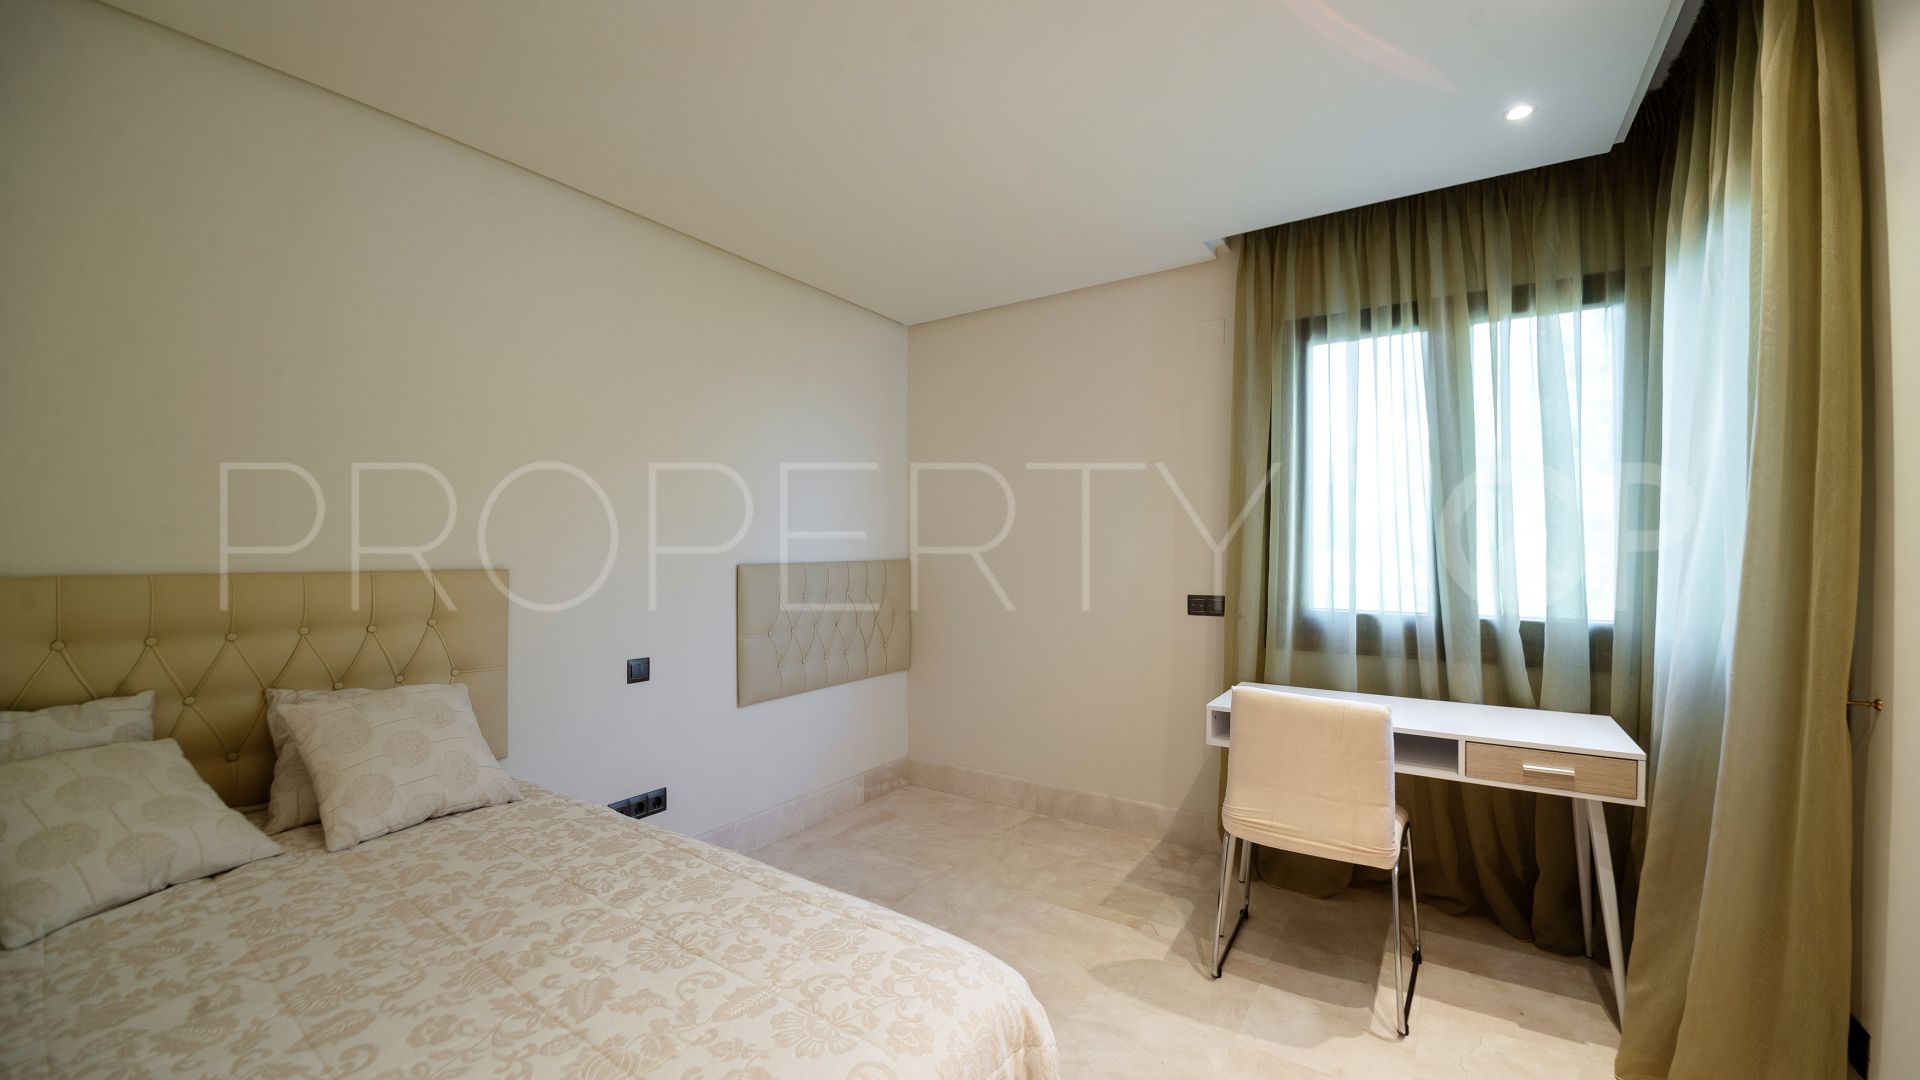 For sale apartment in Doncella Beach with 3 bedrooms